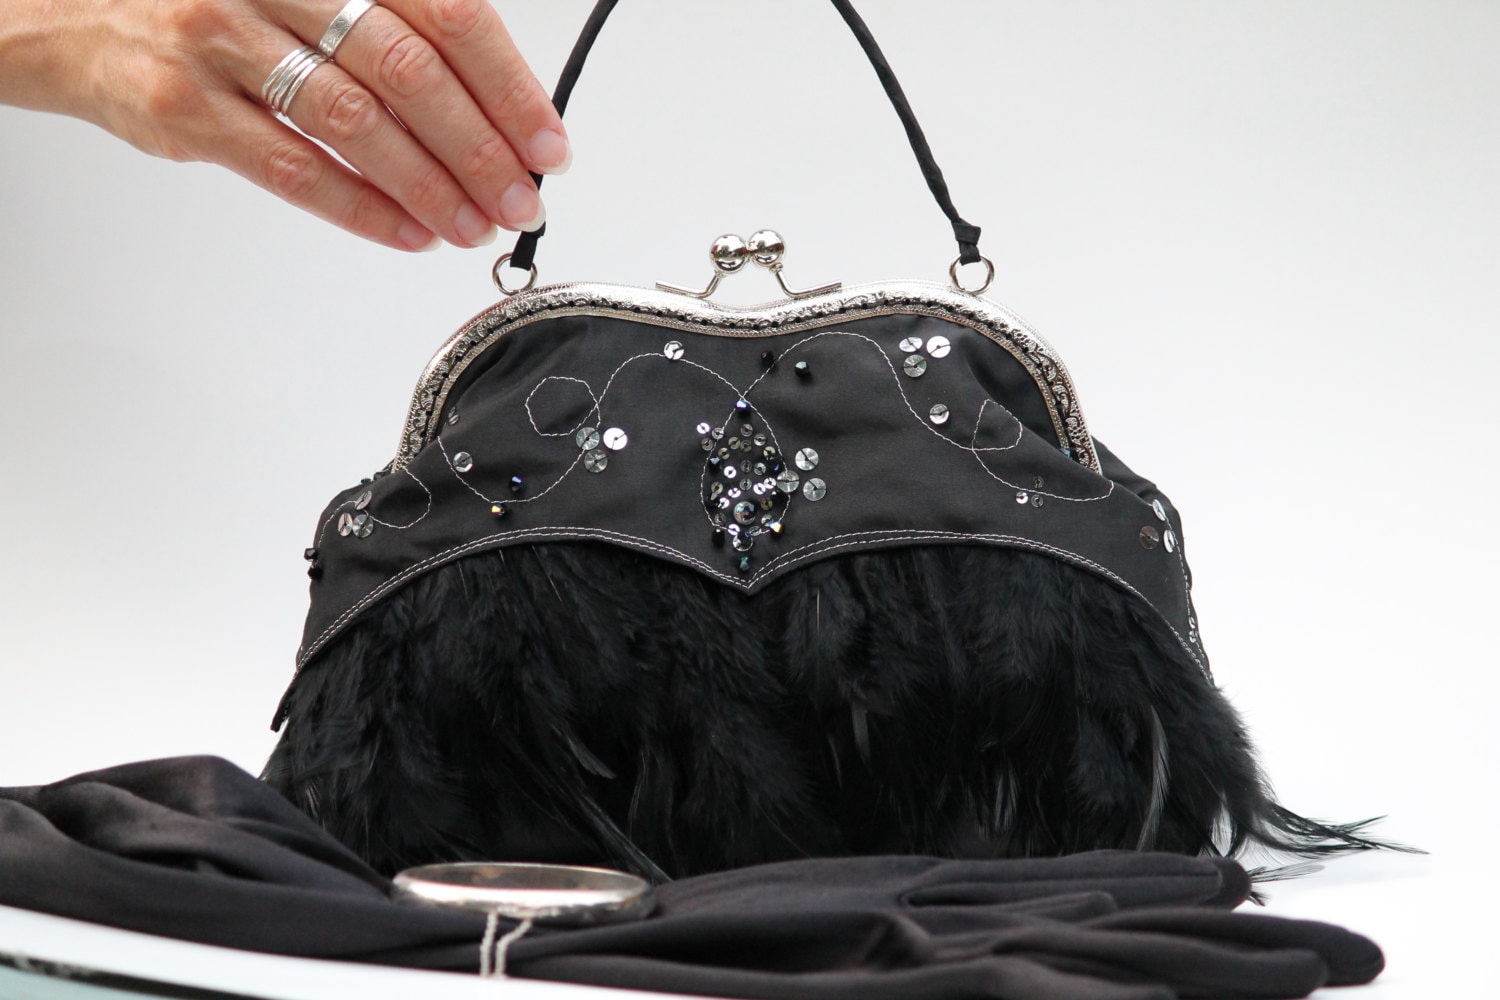 Black Feather Purse Black Evening Bag for New Year's or